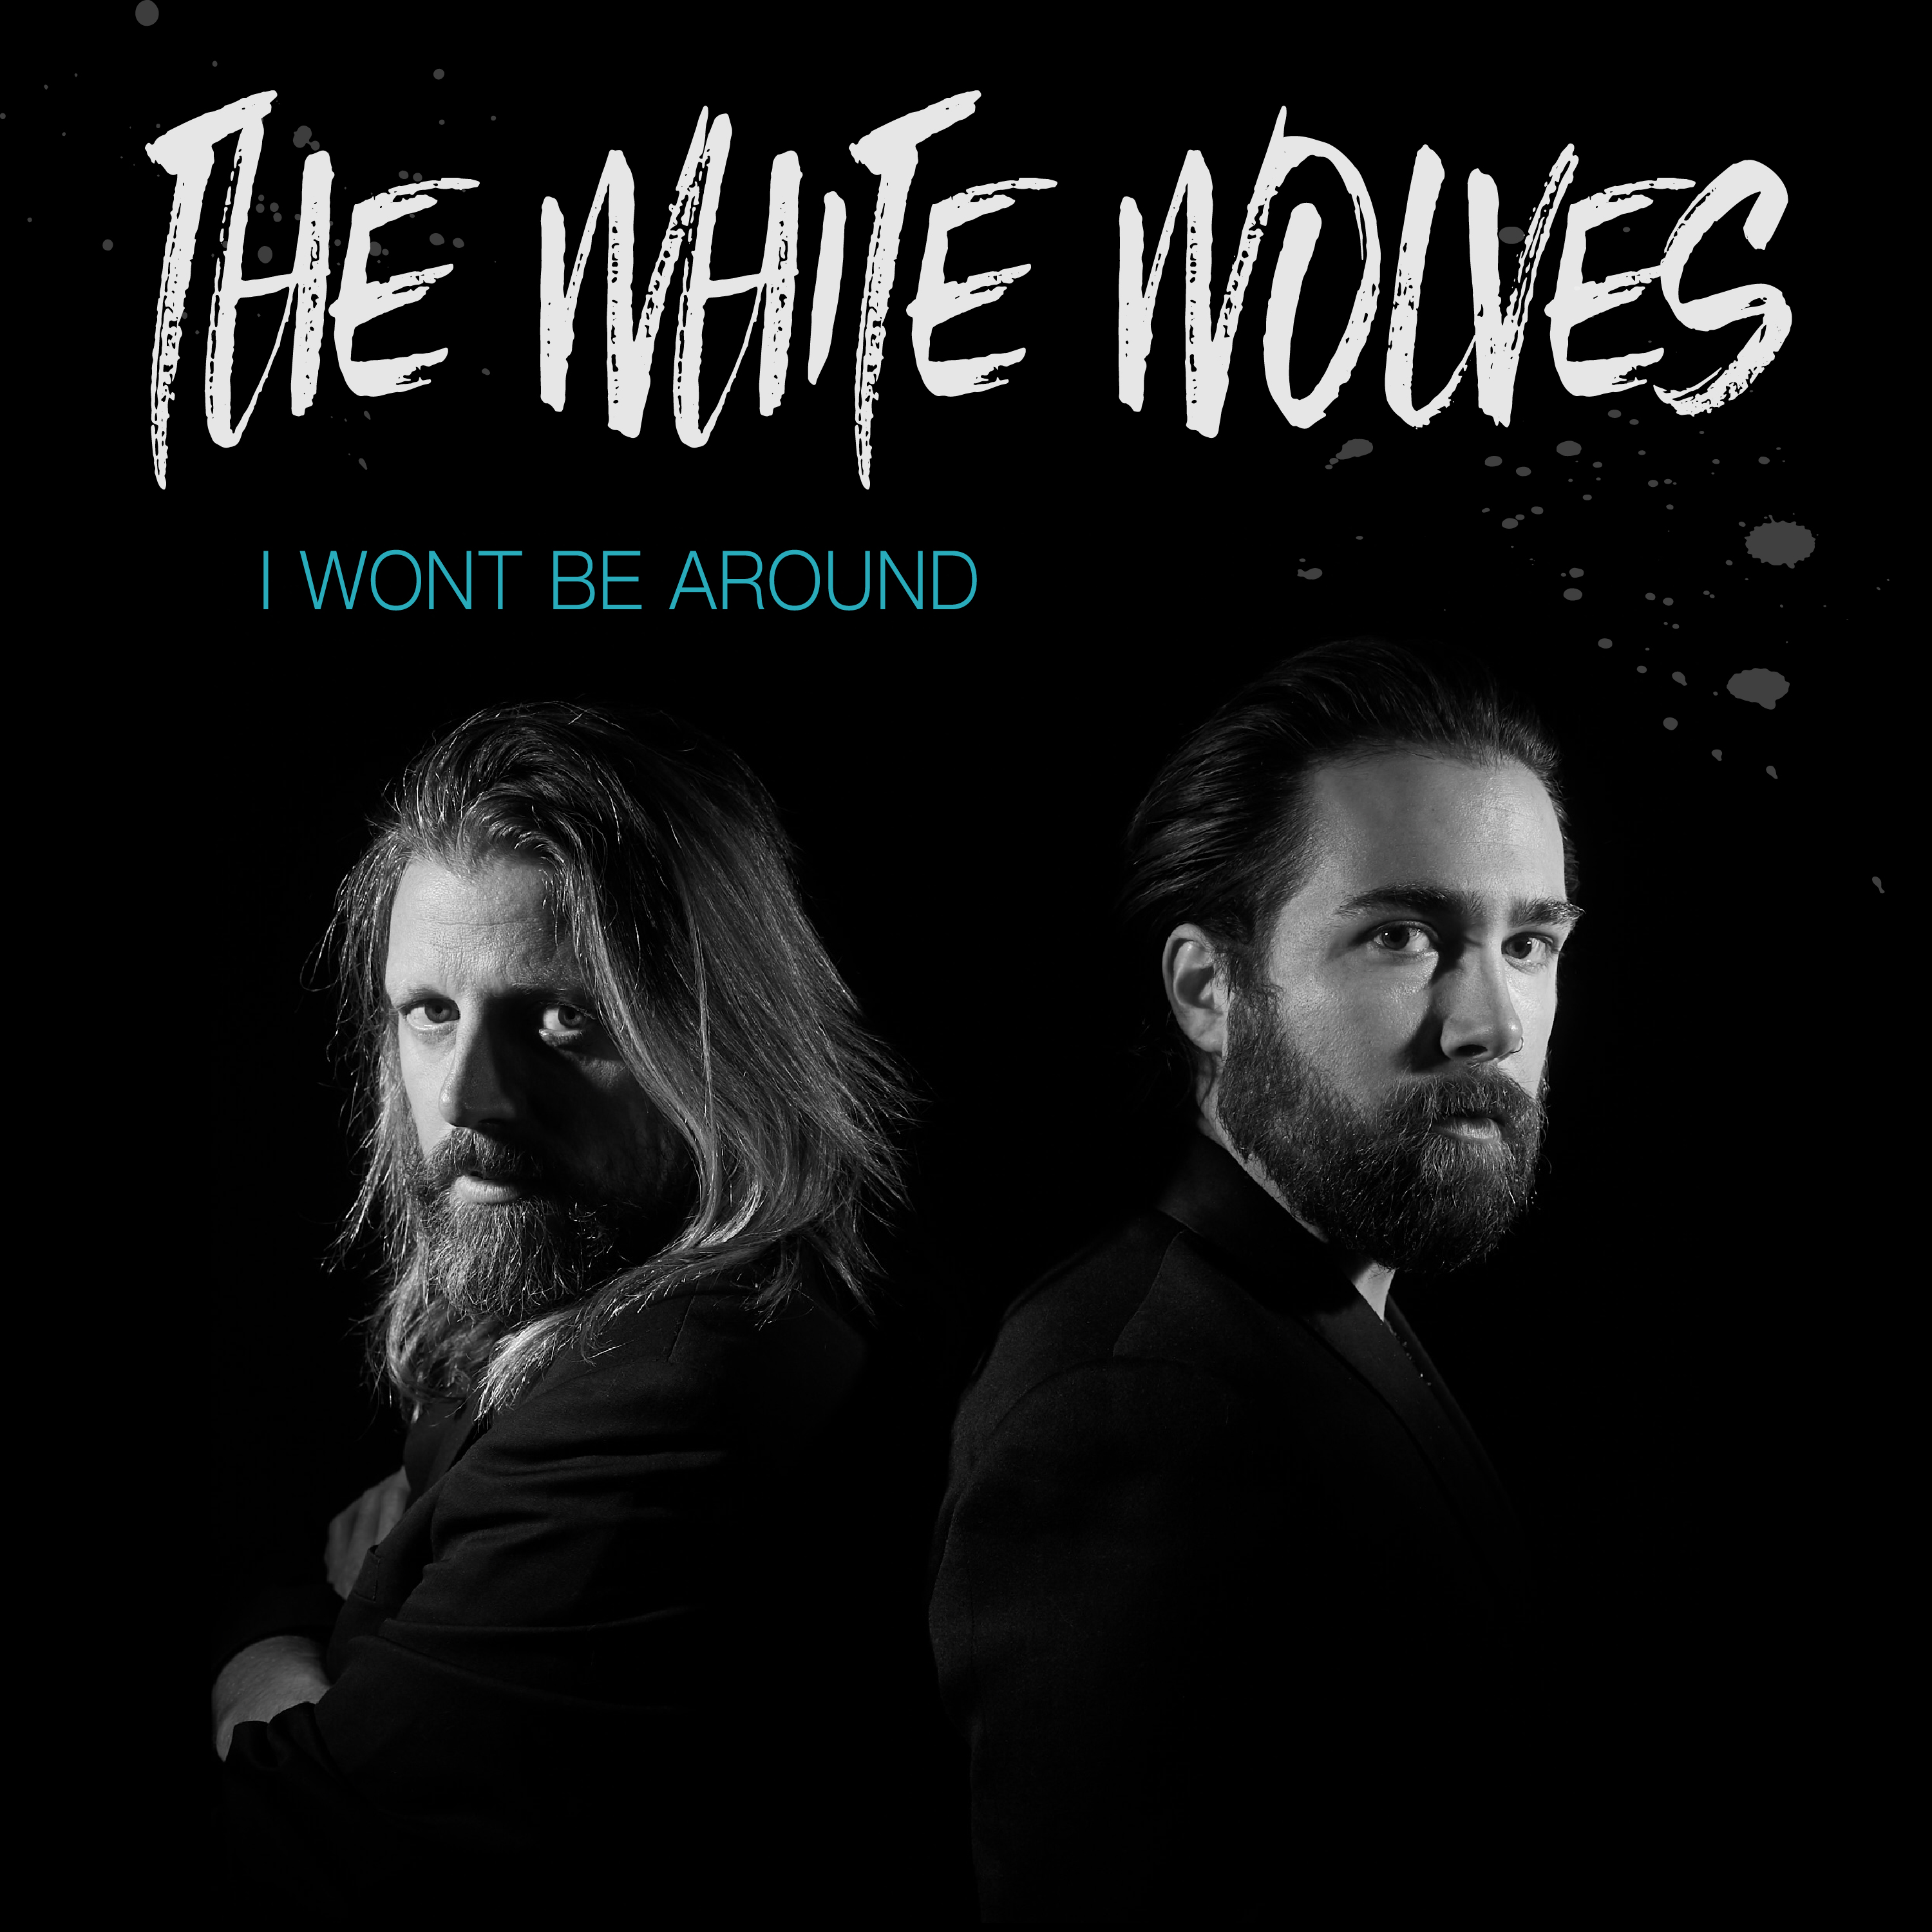 The White Wolves “I Won’t Be Around” Single Review